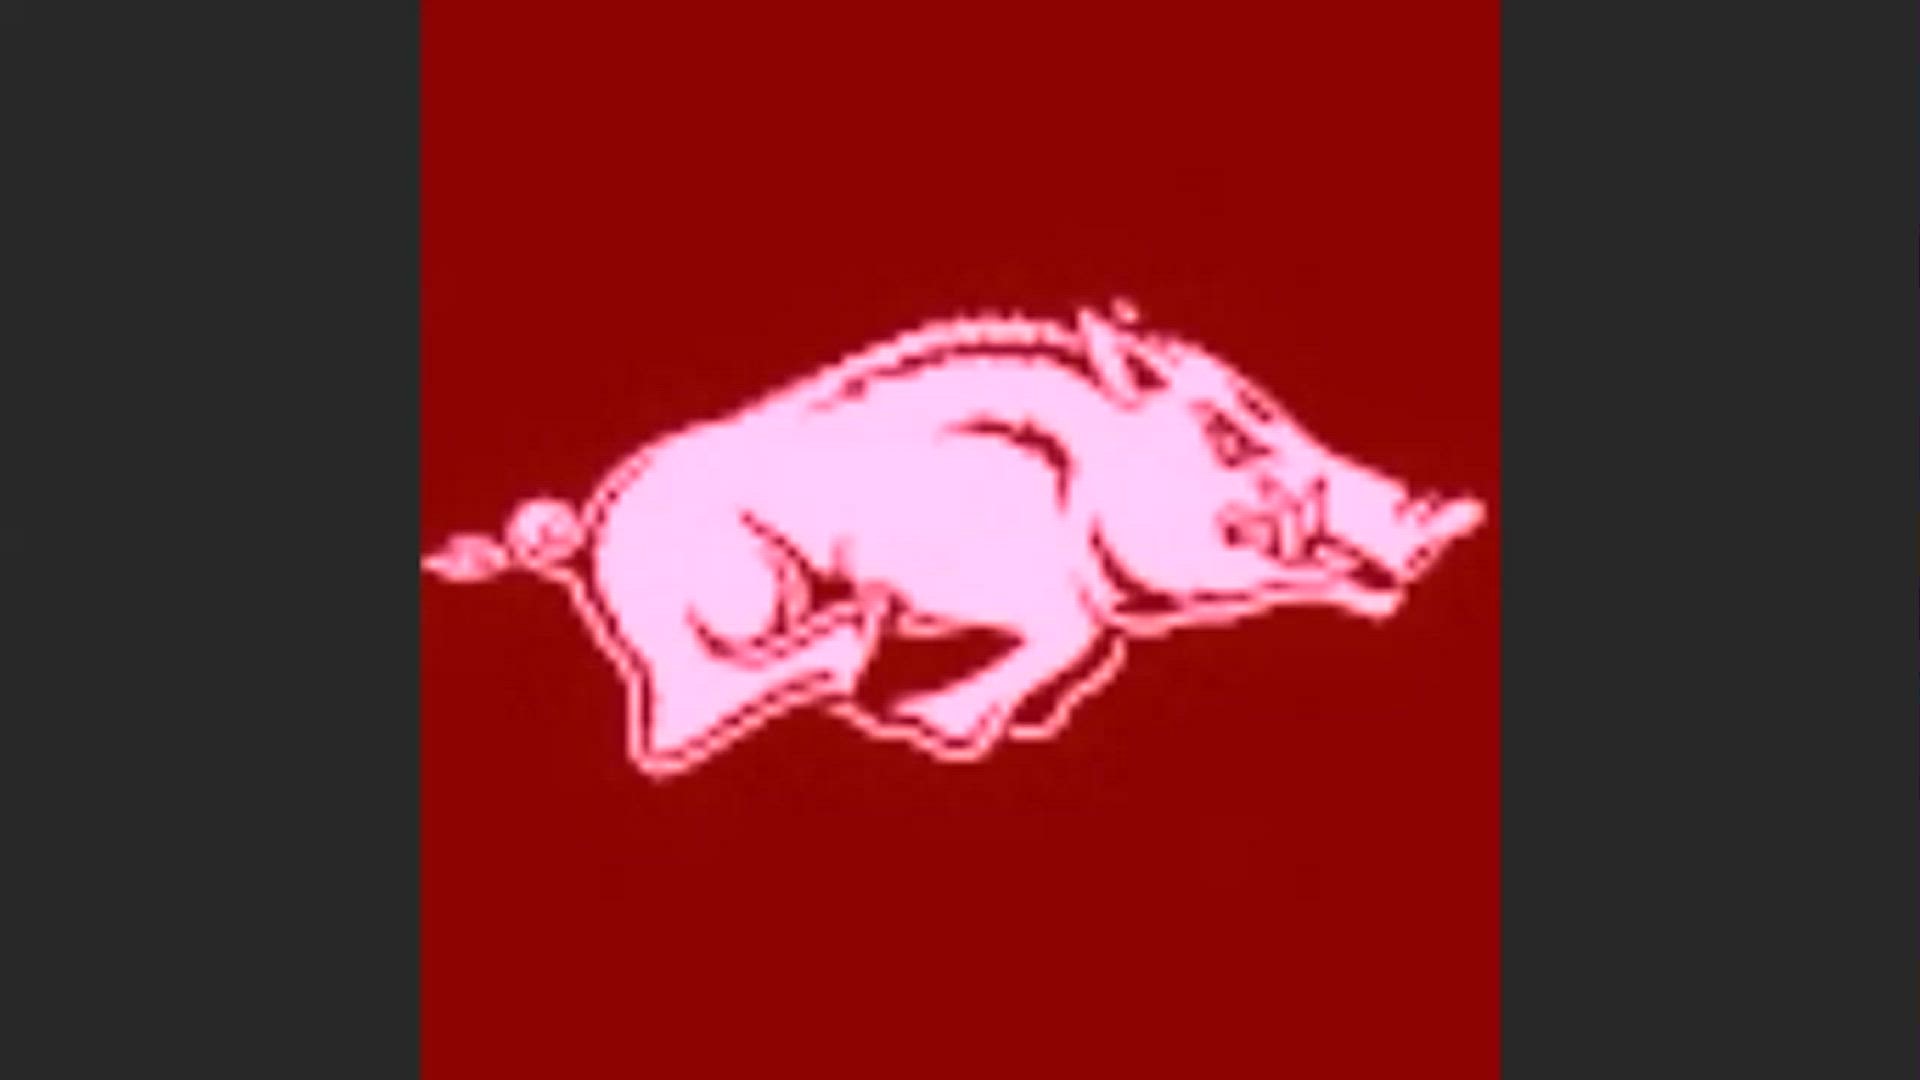 The Razorbacks fall to 2-3 on the year and see their their losing streak against the Aggies grow to nine games